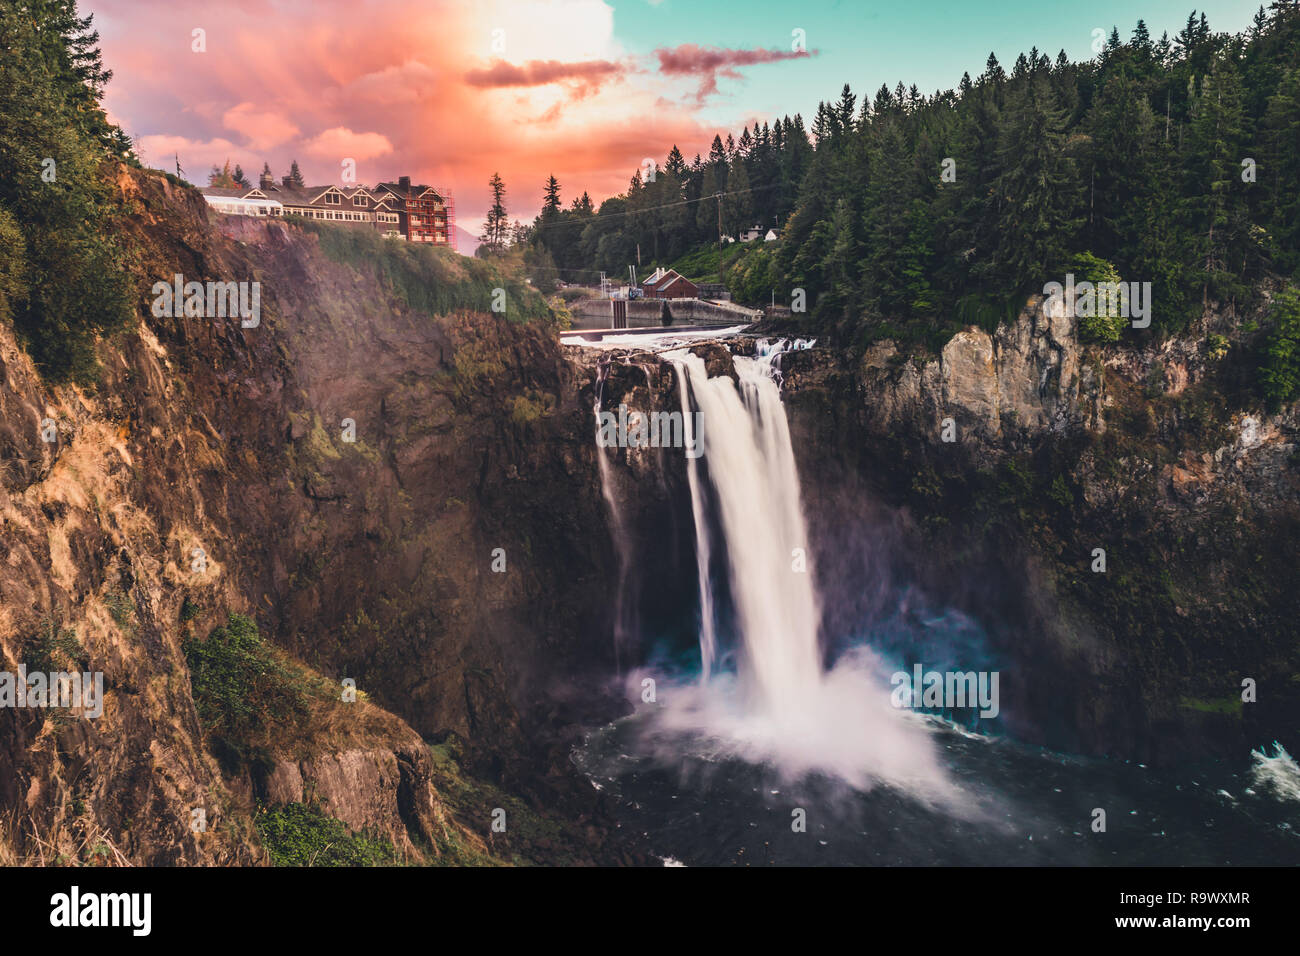 A waterfall known as Snoqualmie Falls flowing at sunset in Snoqualmie Washington Stock Photo